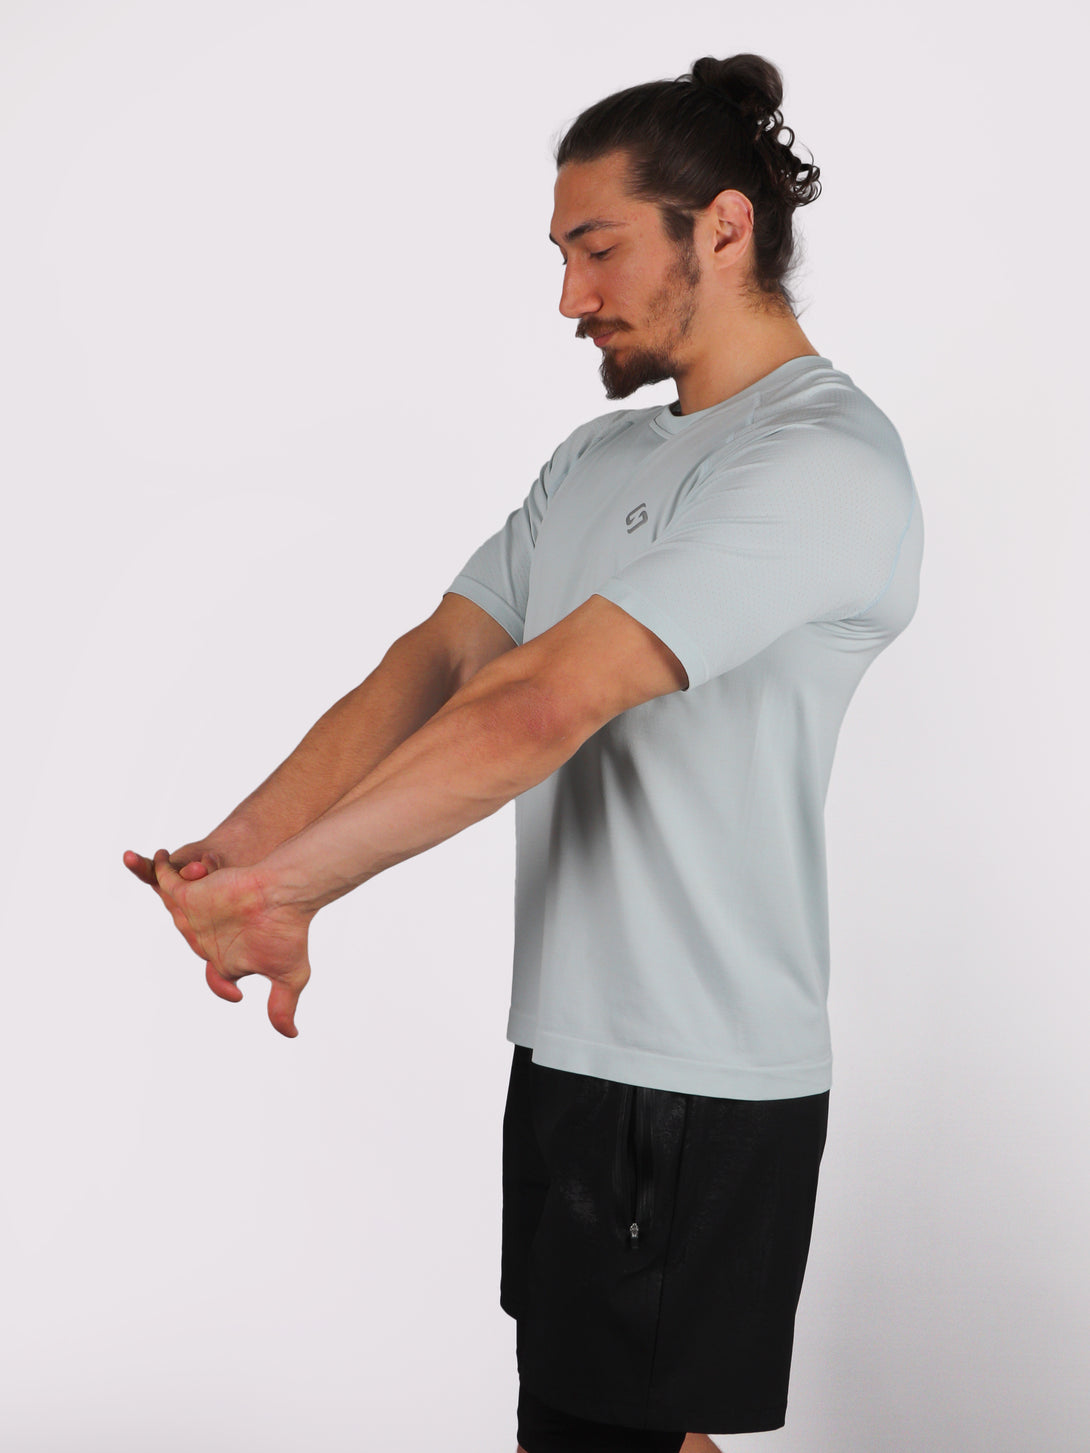 A Man Wearing Baby Blue Color Seamless Workout Comfort T-Shirt